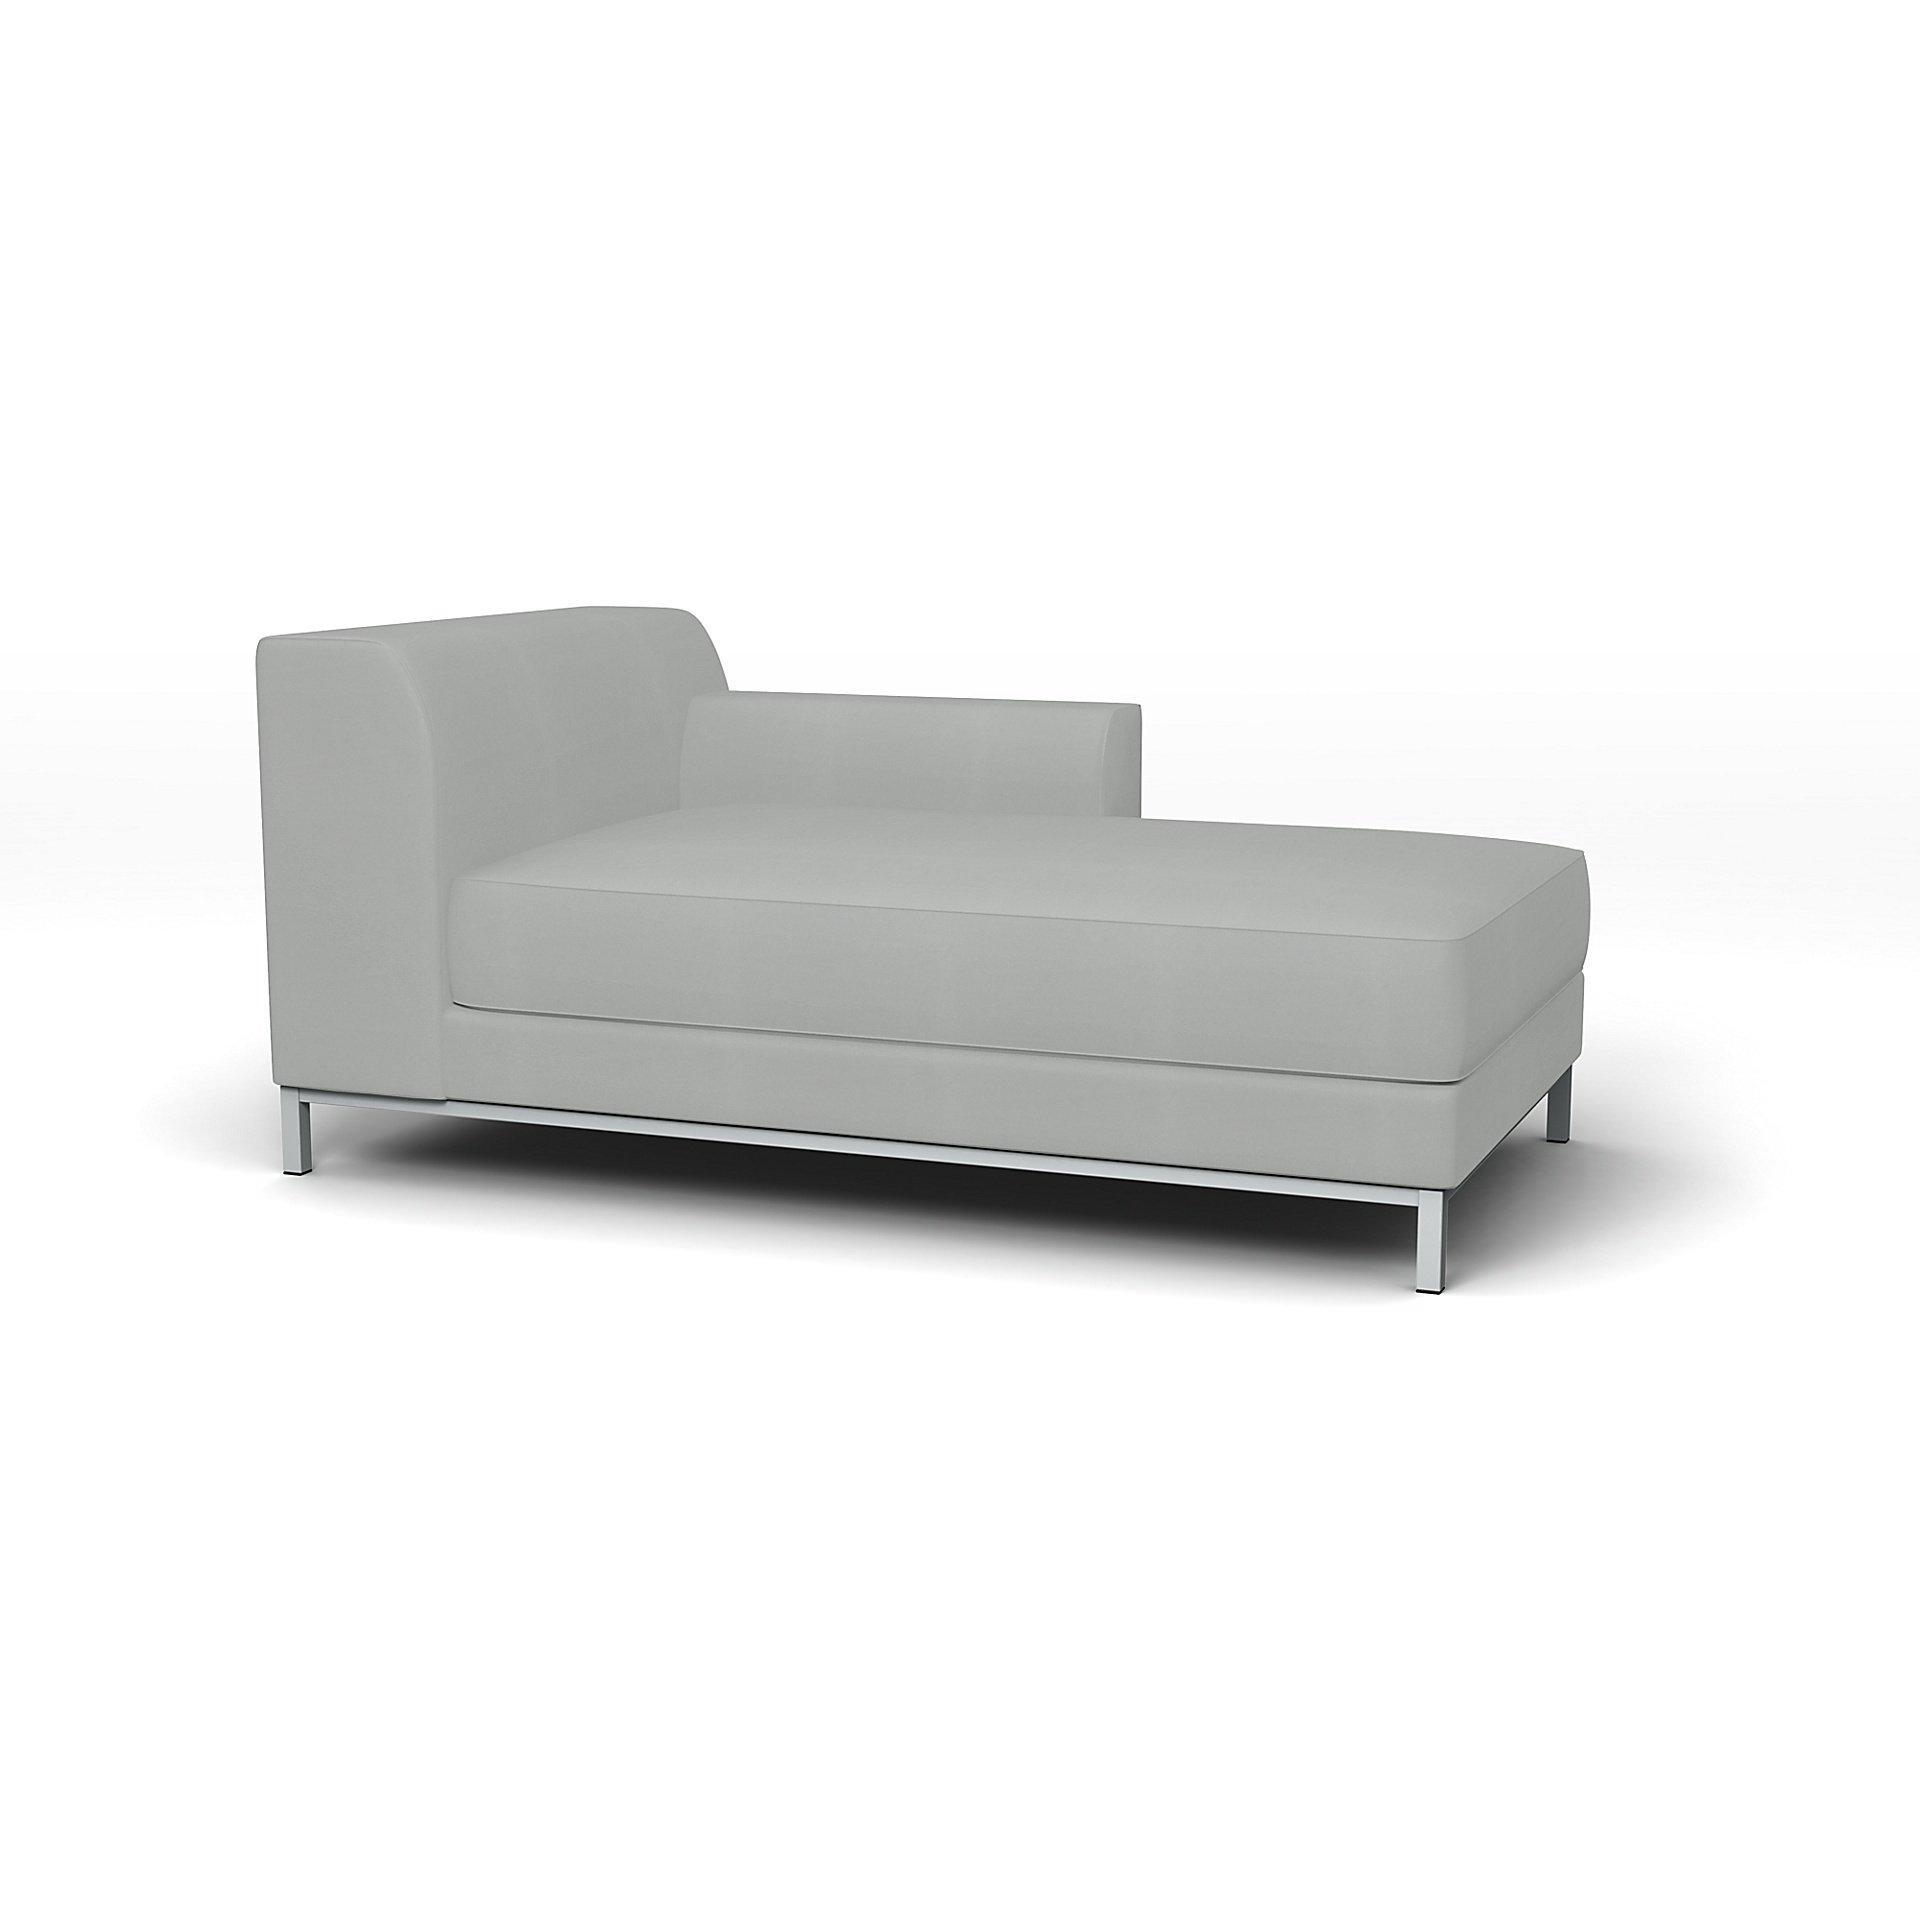 IKEA - Kramfors Chaise Longue with Right Arm Cover, Silver Grey, Cotton - Bemz